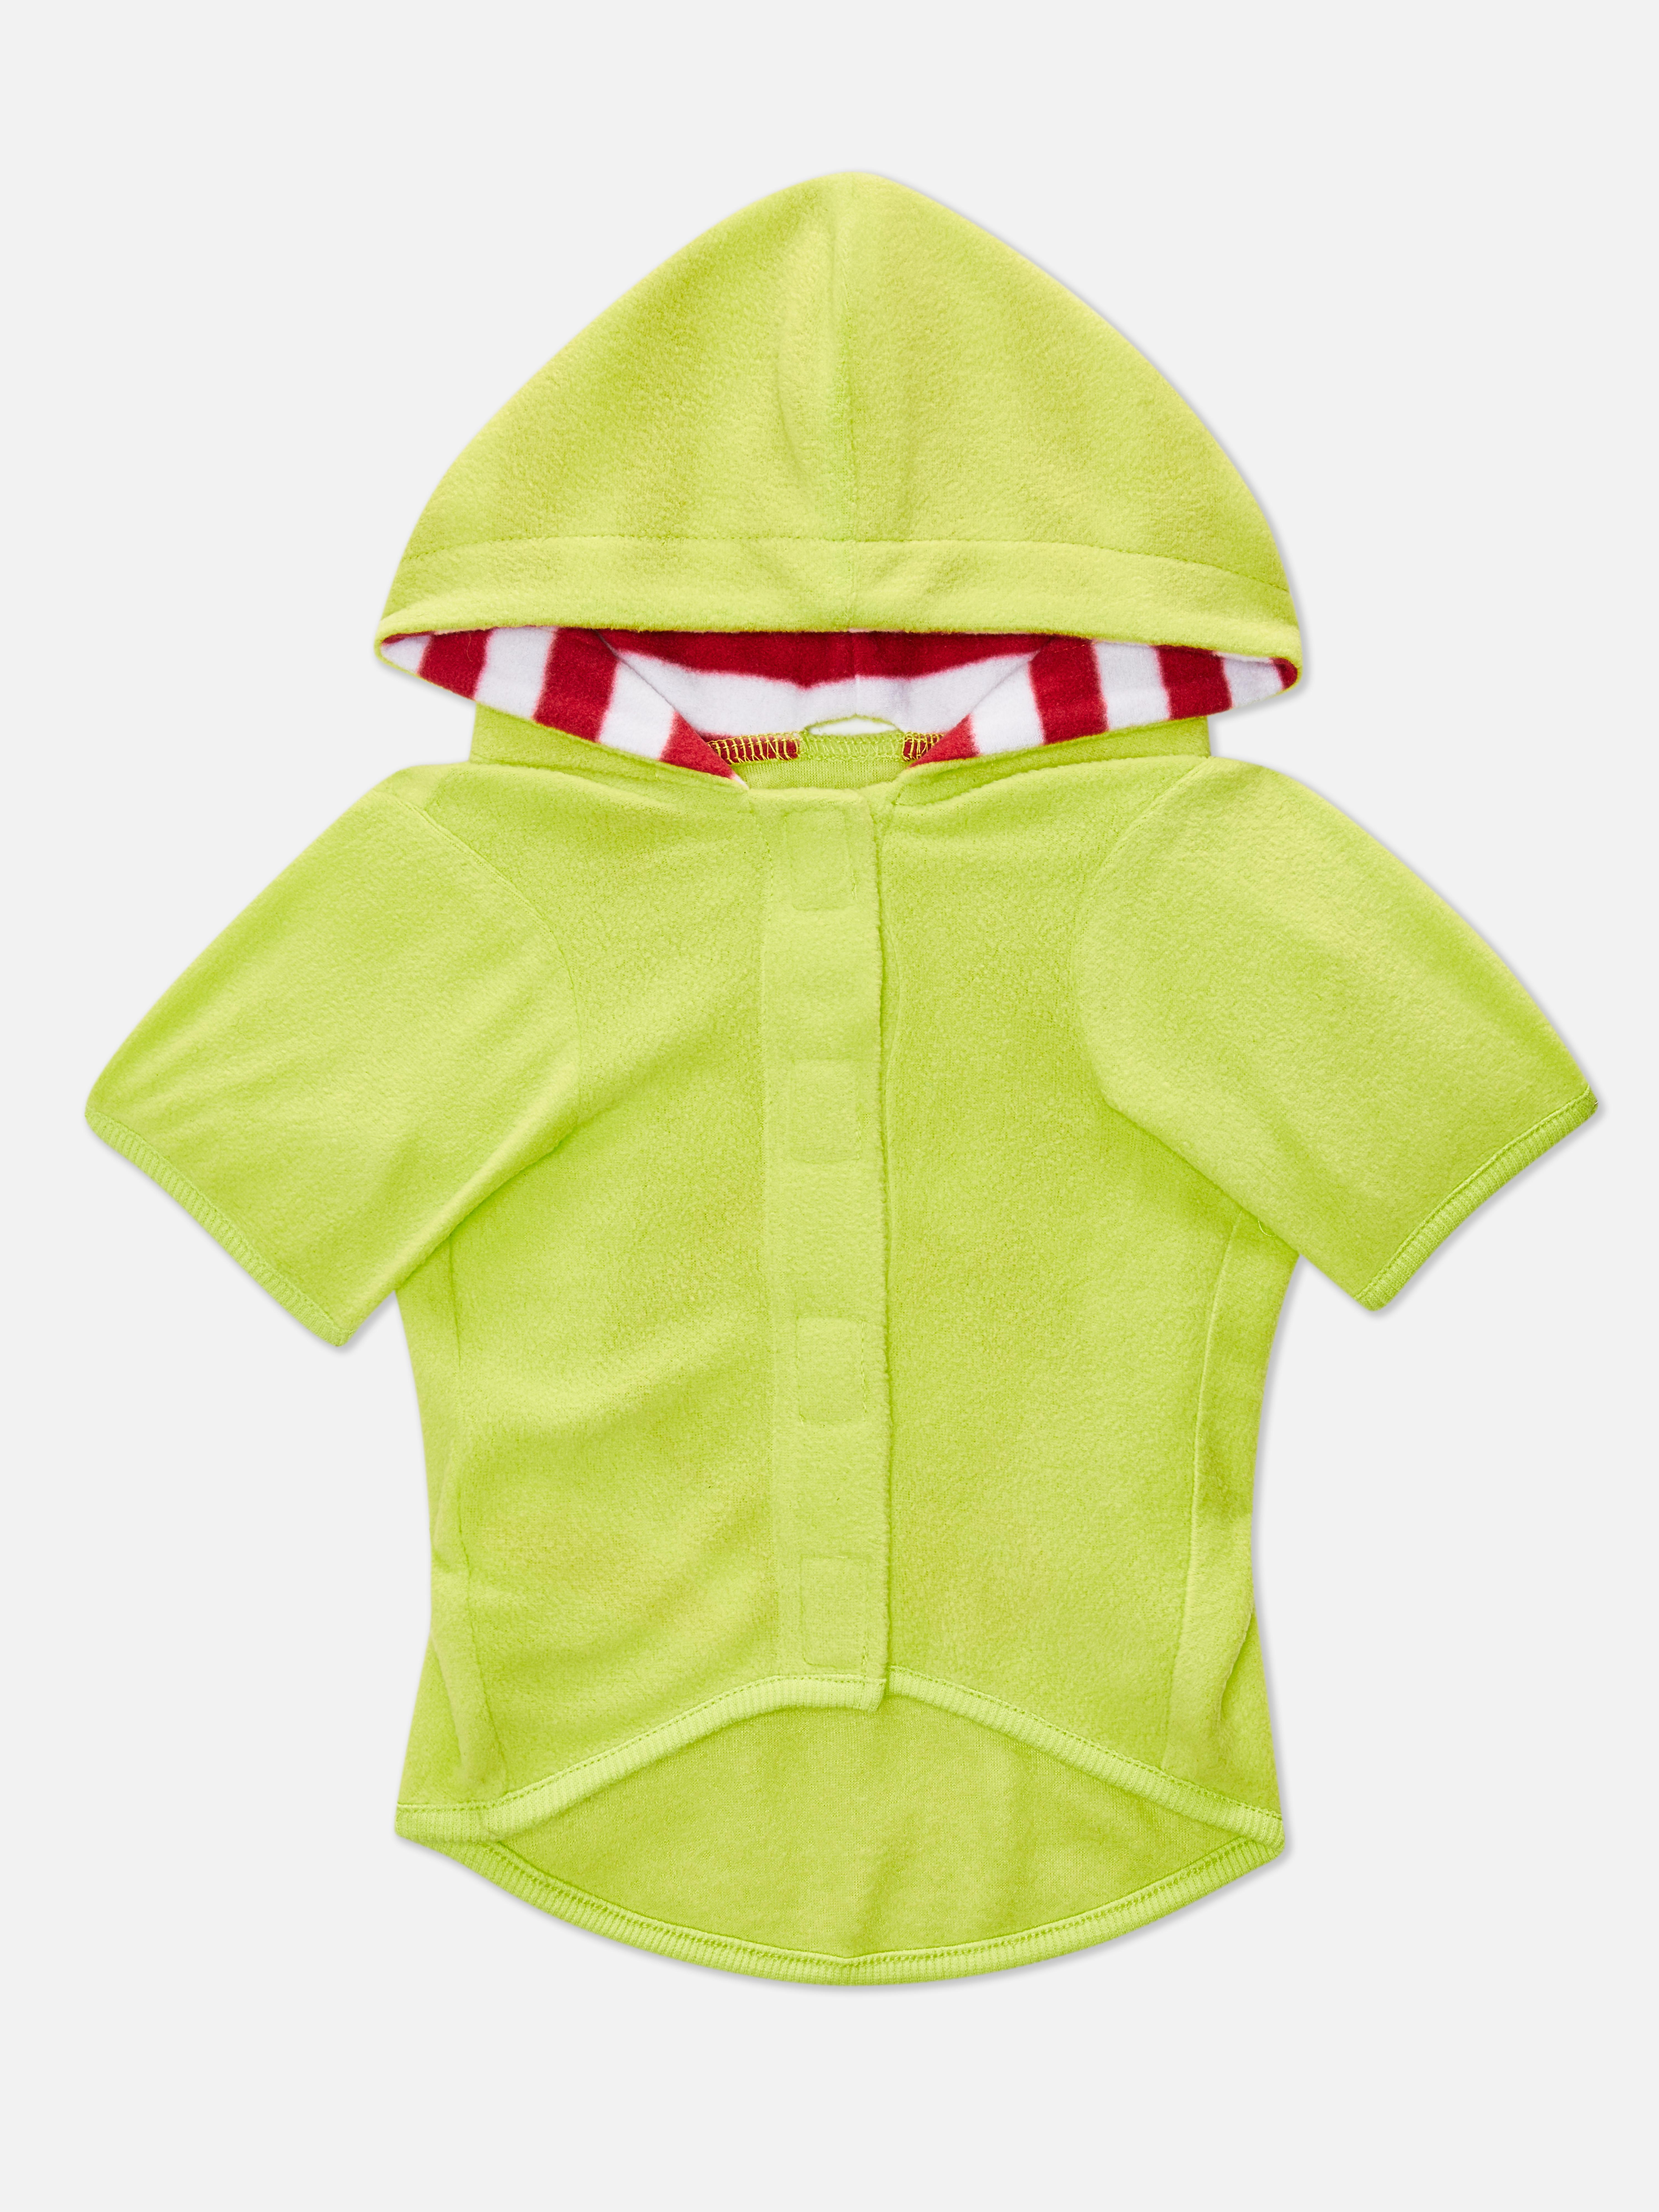 The Grinch Pet Outfit Green